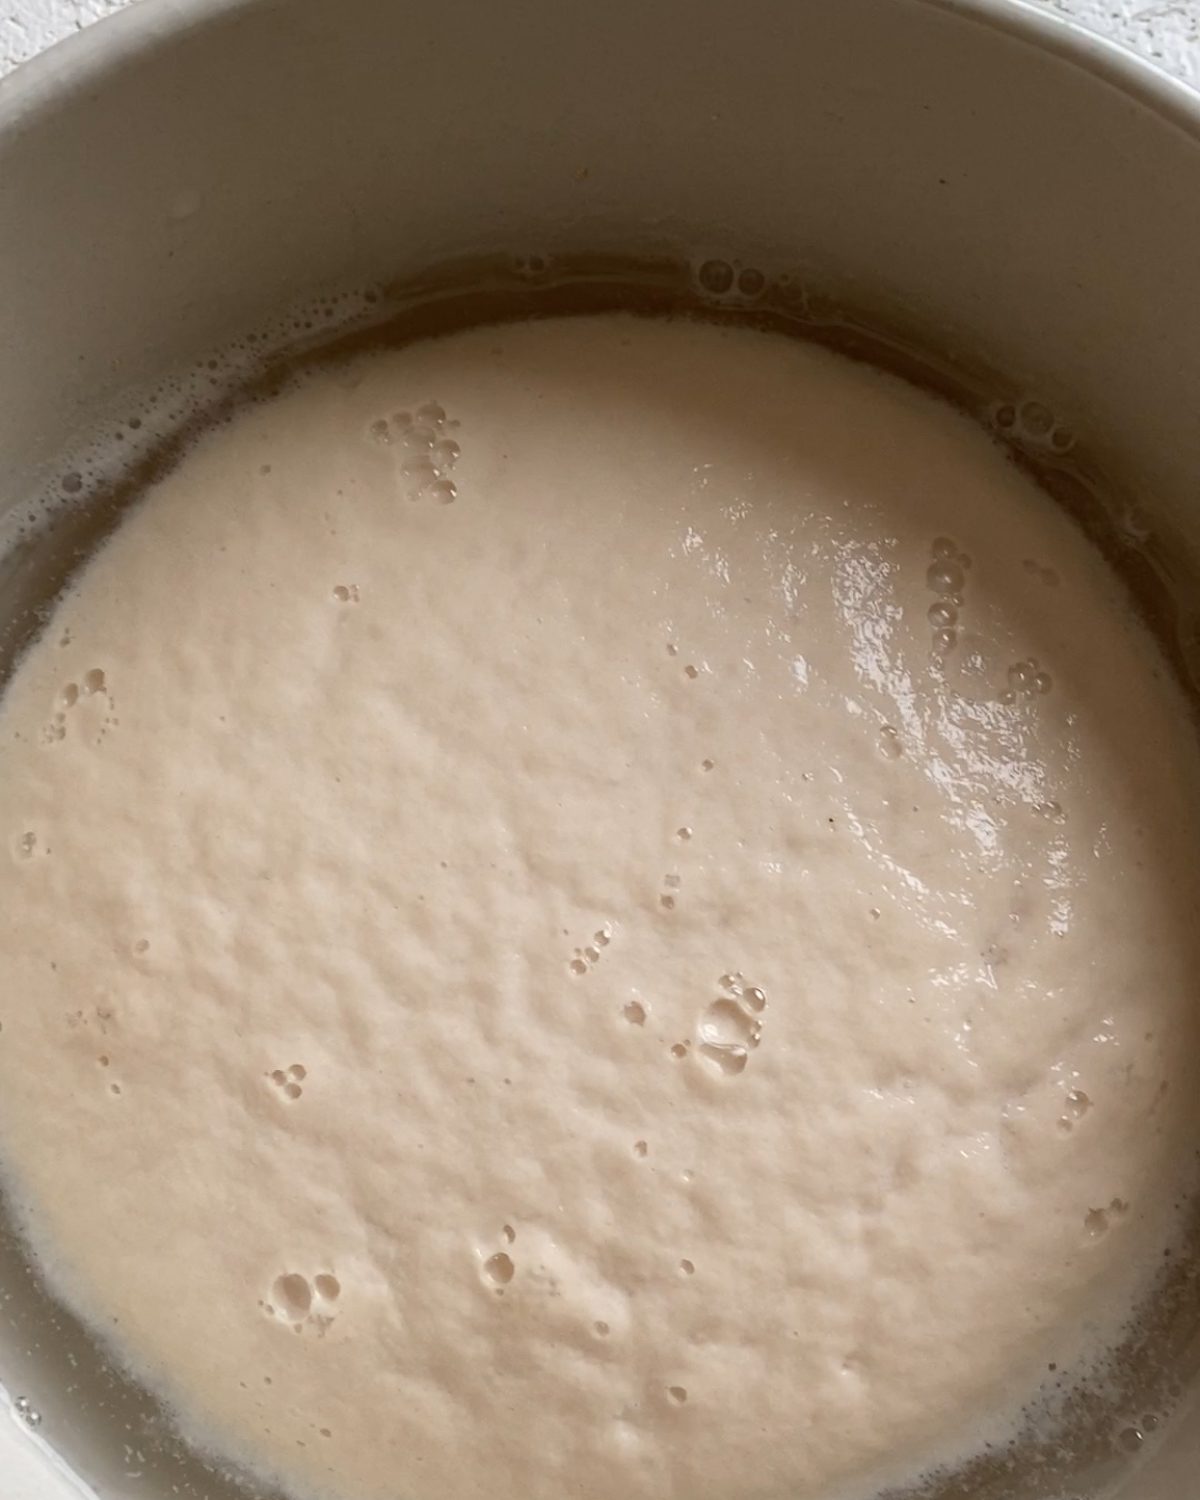 process of yeast mixture rising with bubbles at the surface